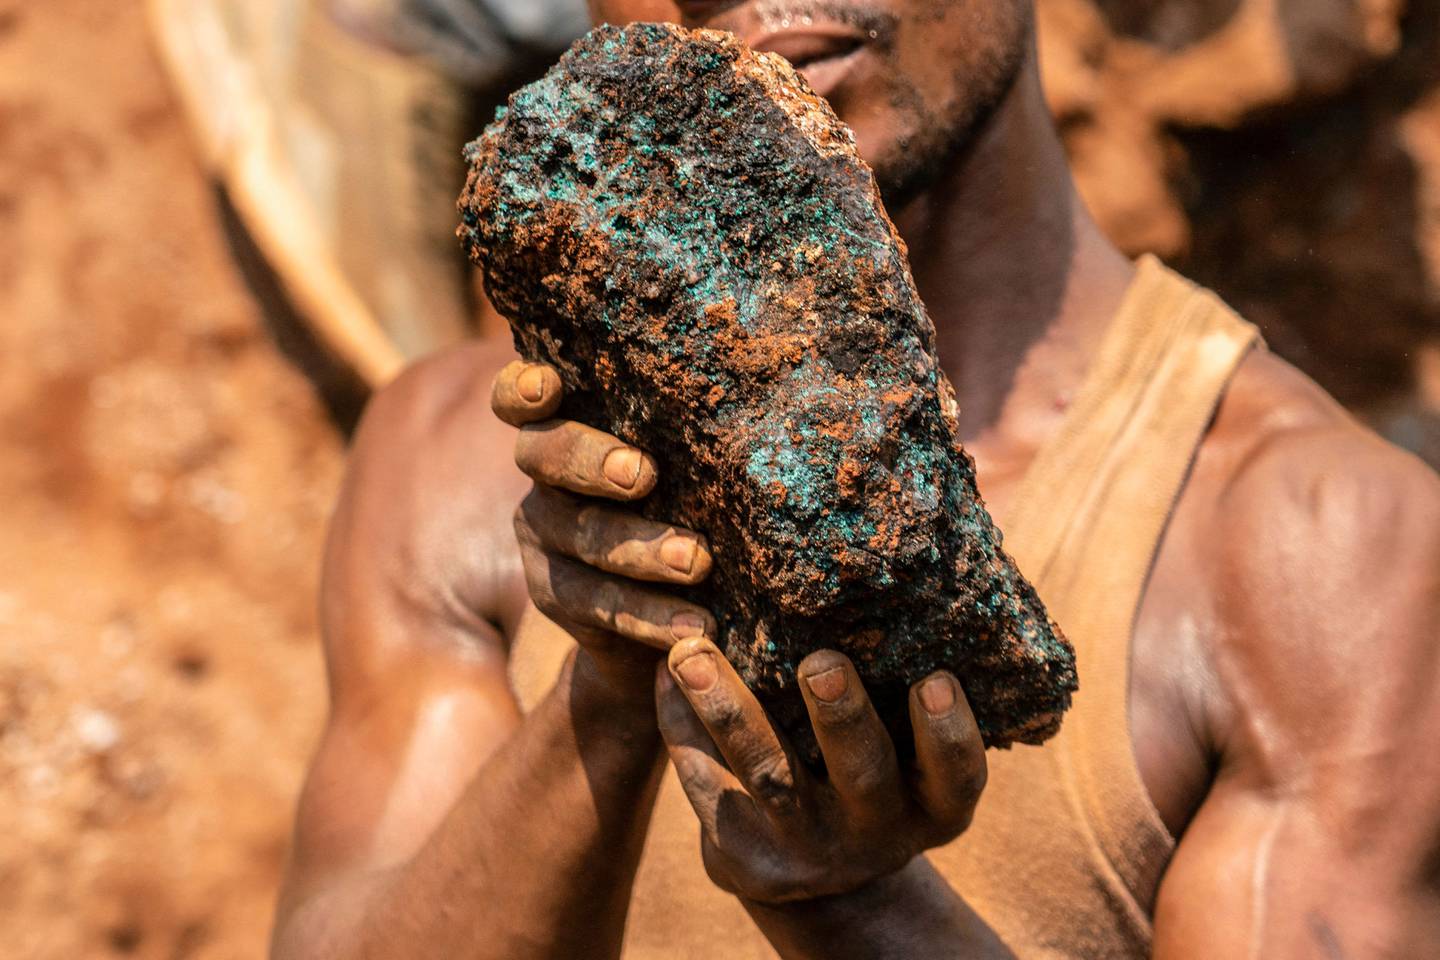 A miner with a cobalt stone near Kolwezi, Congo, on October 12. Congo produced 72 per cent of the world’s cobalt last year. Demand is exploding due to themetal's use in rechargeable batteries that power mobile phones and electric cars. AFP